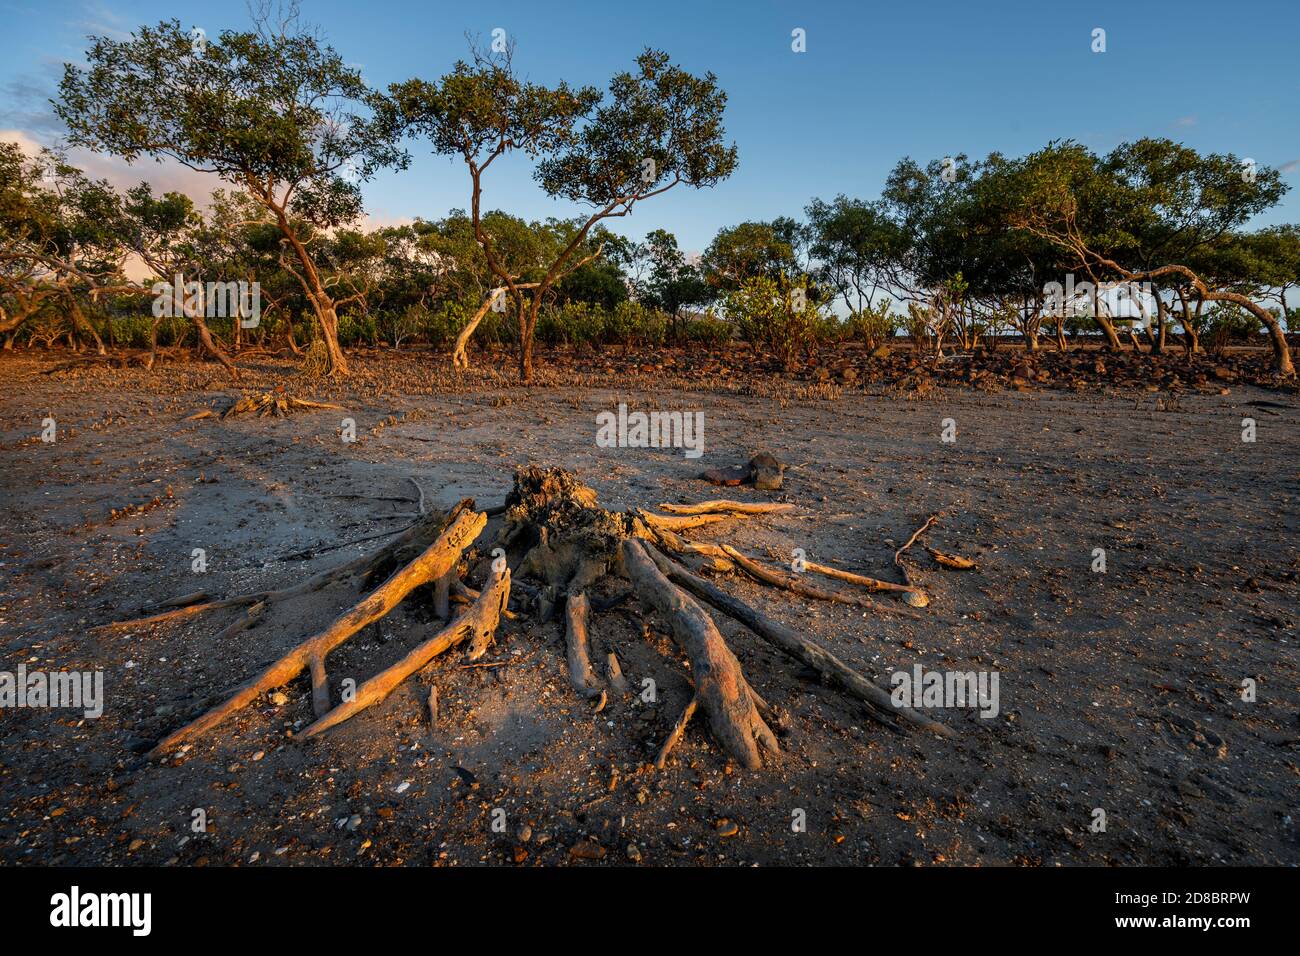 Decaying mangrove stump on mudflat at low tide, Clairview, Central Queensland Australia Stock Photo